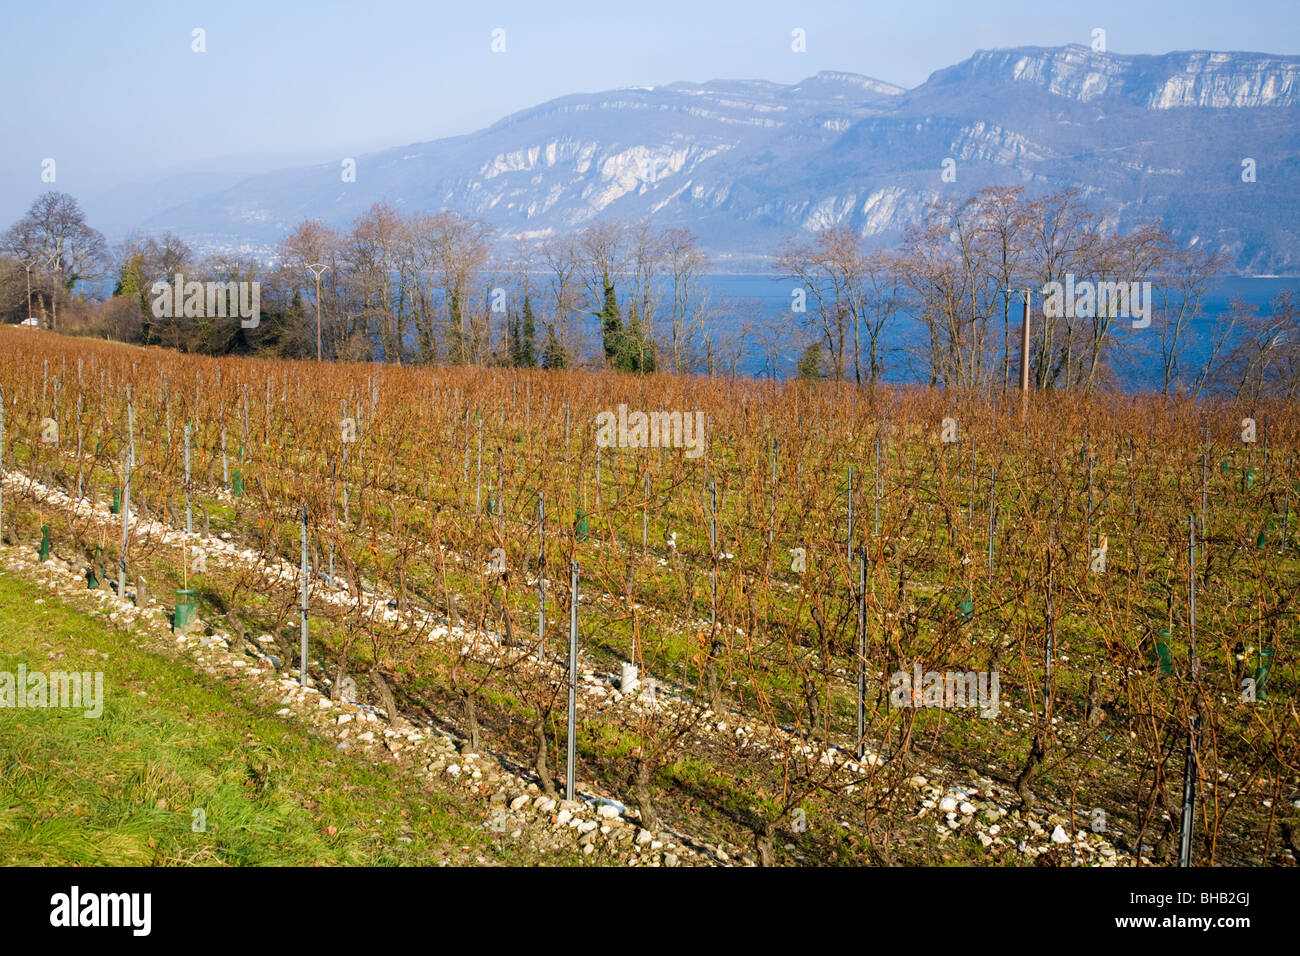 A French alpine vineyard / vine yard during winter. The Alps are visible in the distance. Stock Photo